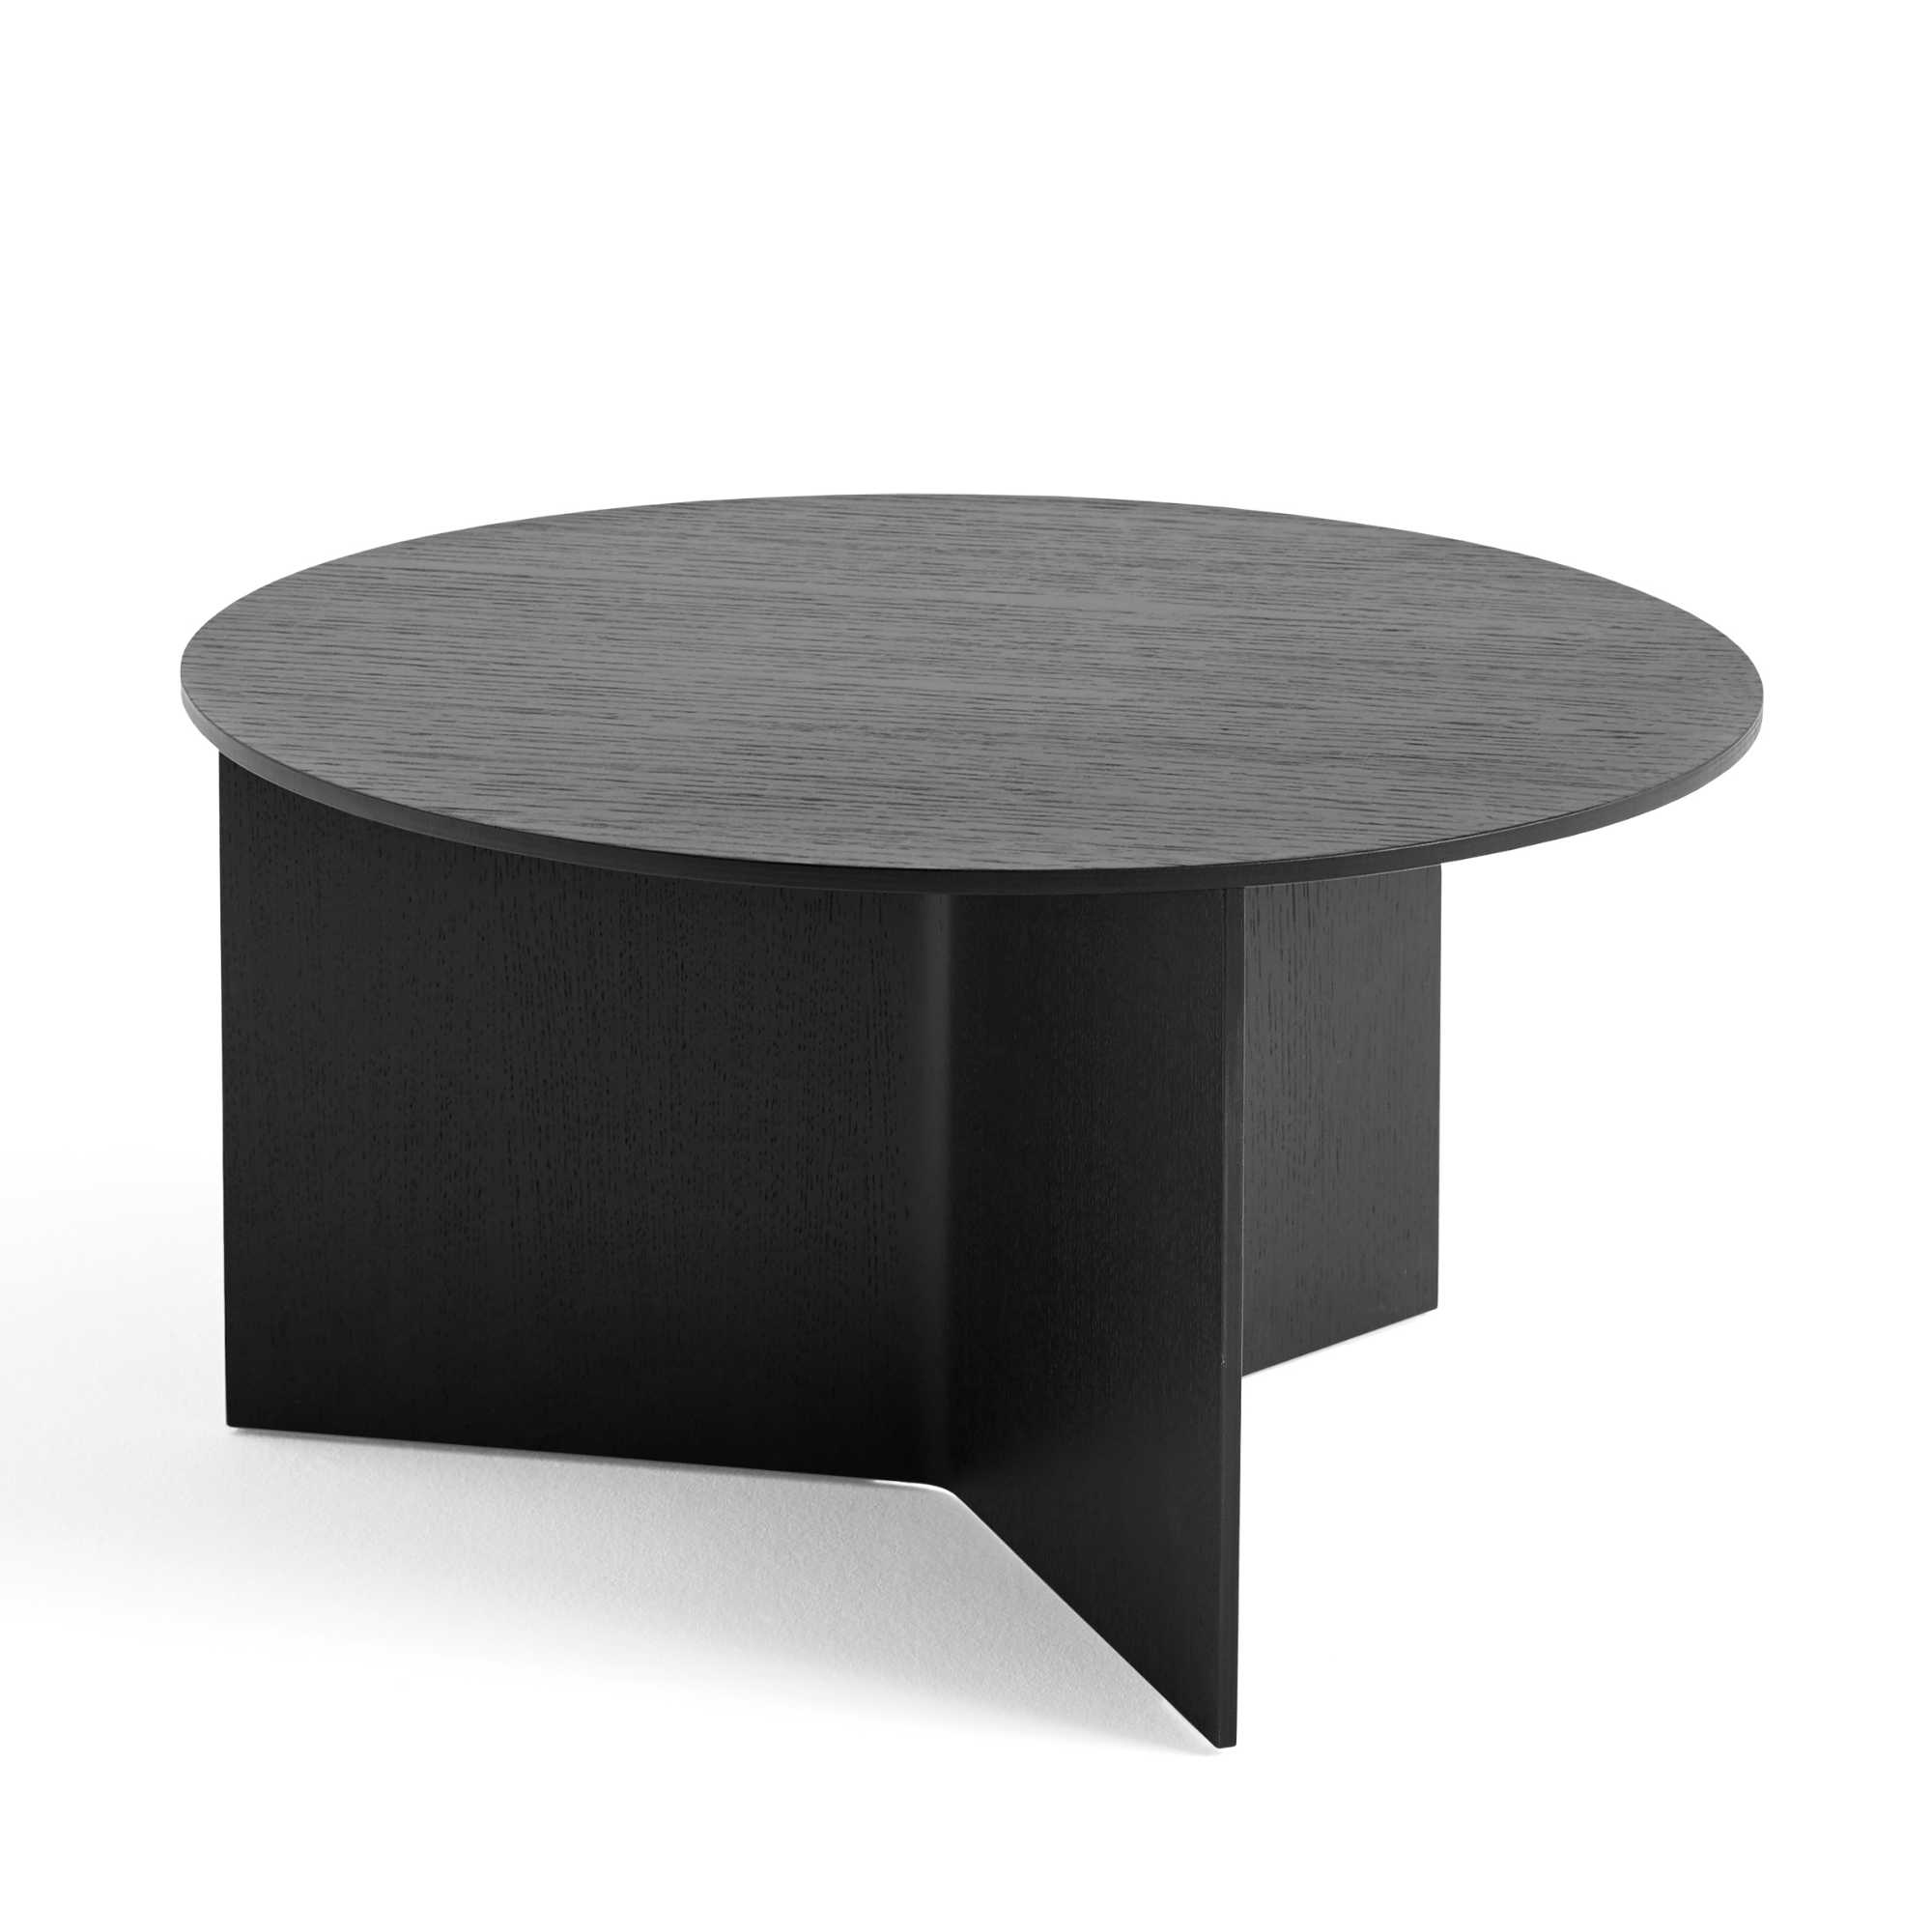 Slit Table Wood Round XL, Water-Based Lacquered Black Oak (Φ65 x H35.5 cm)